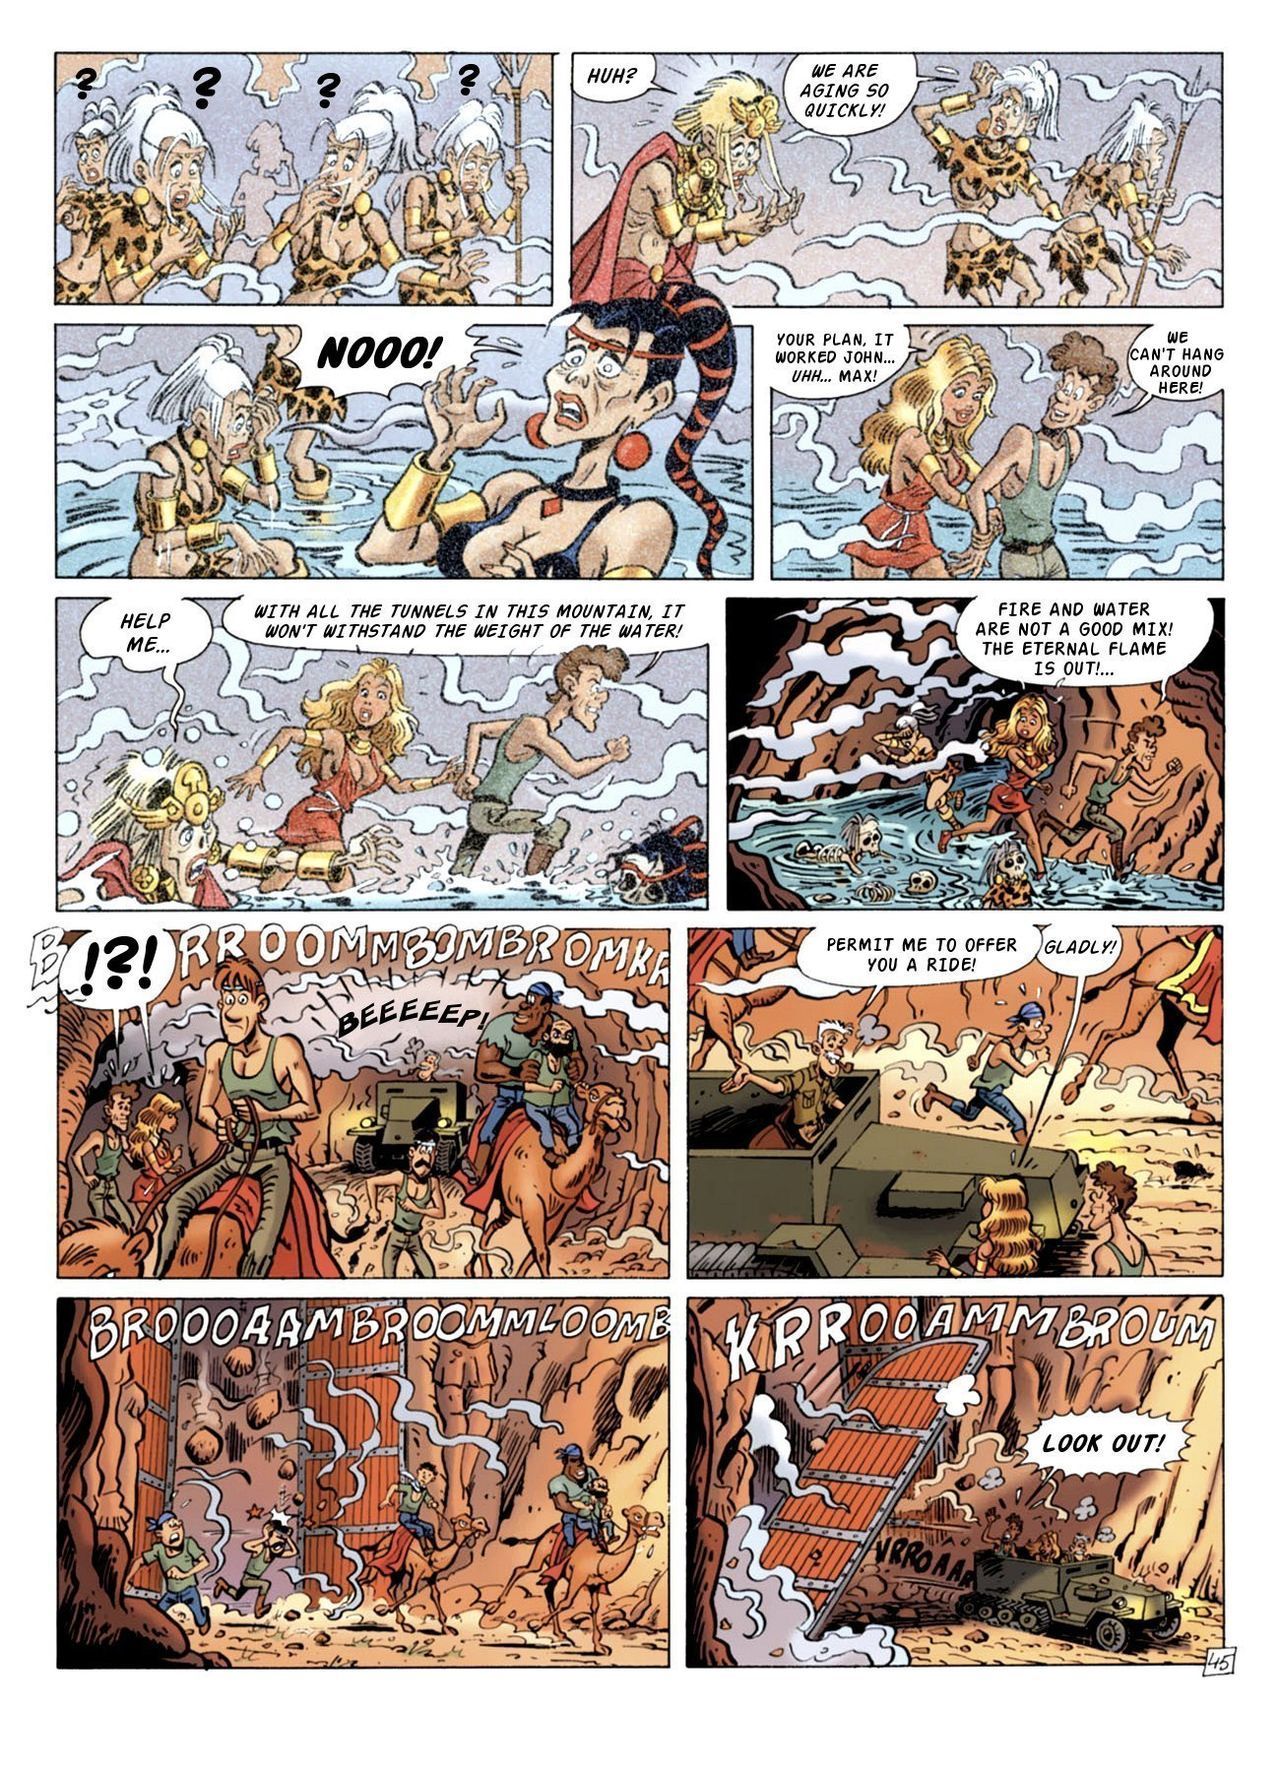 Di Sano A Real Woman 4 - Johanna- Lady of the Sands - part 3